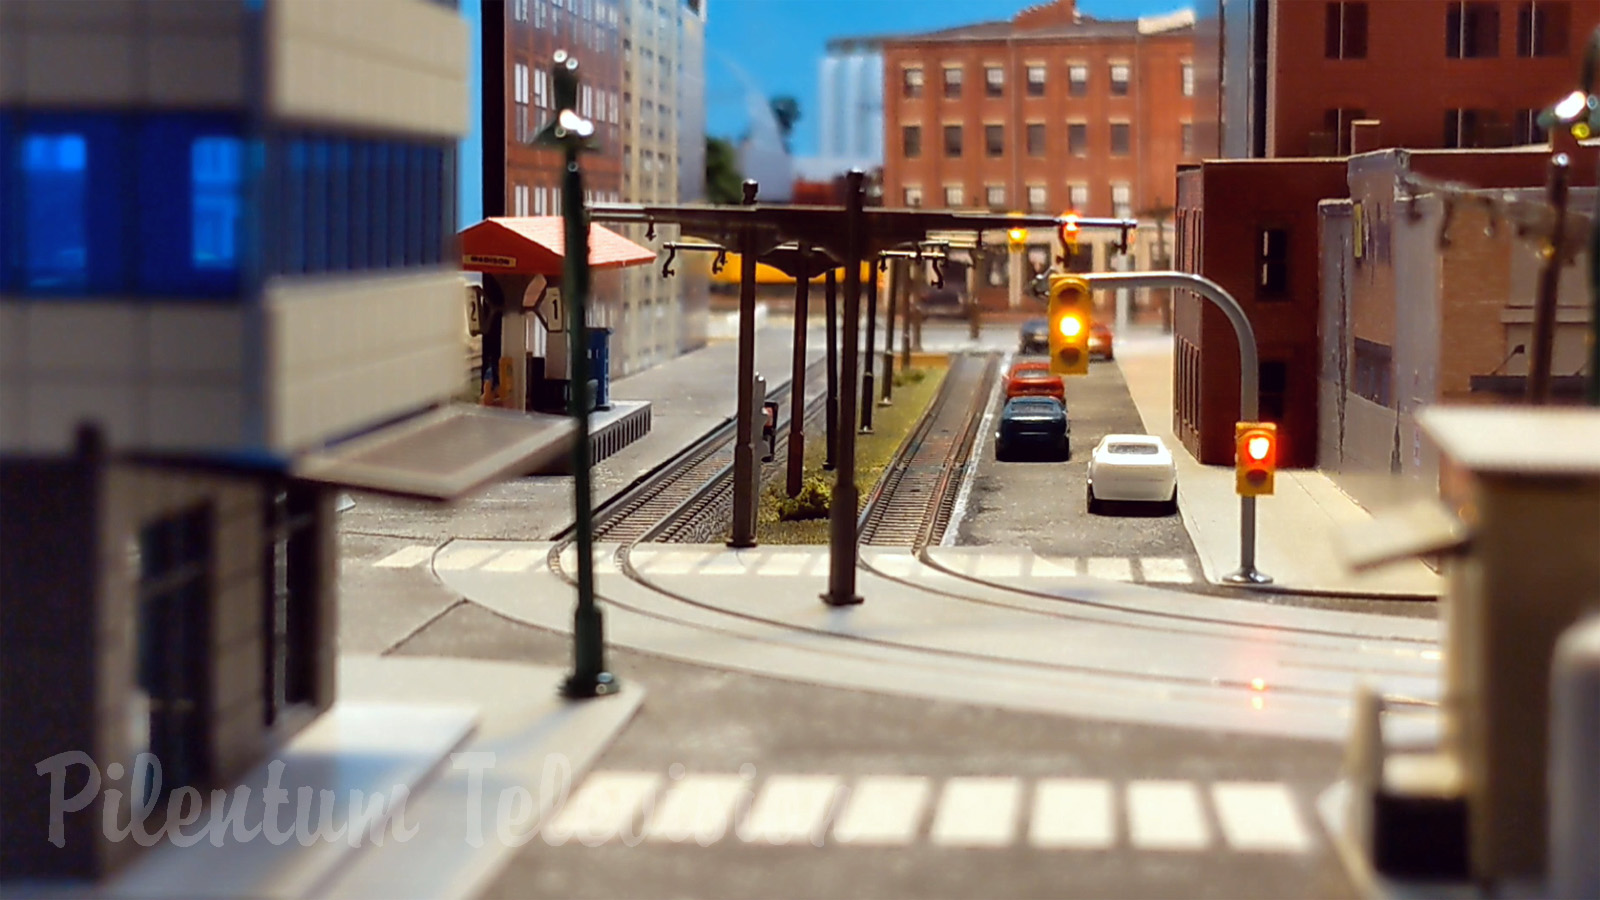 N Scale City Edge Micro Model Railroad Layout Depicting Trams, Trolleys, Streetcars and Light Rail